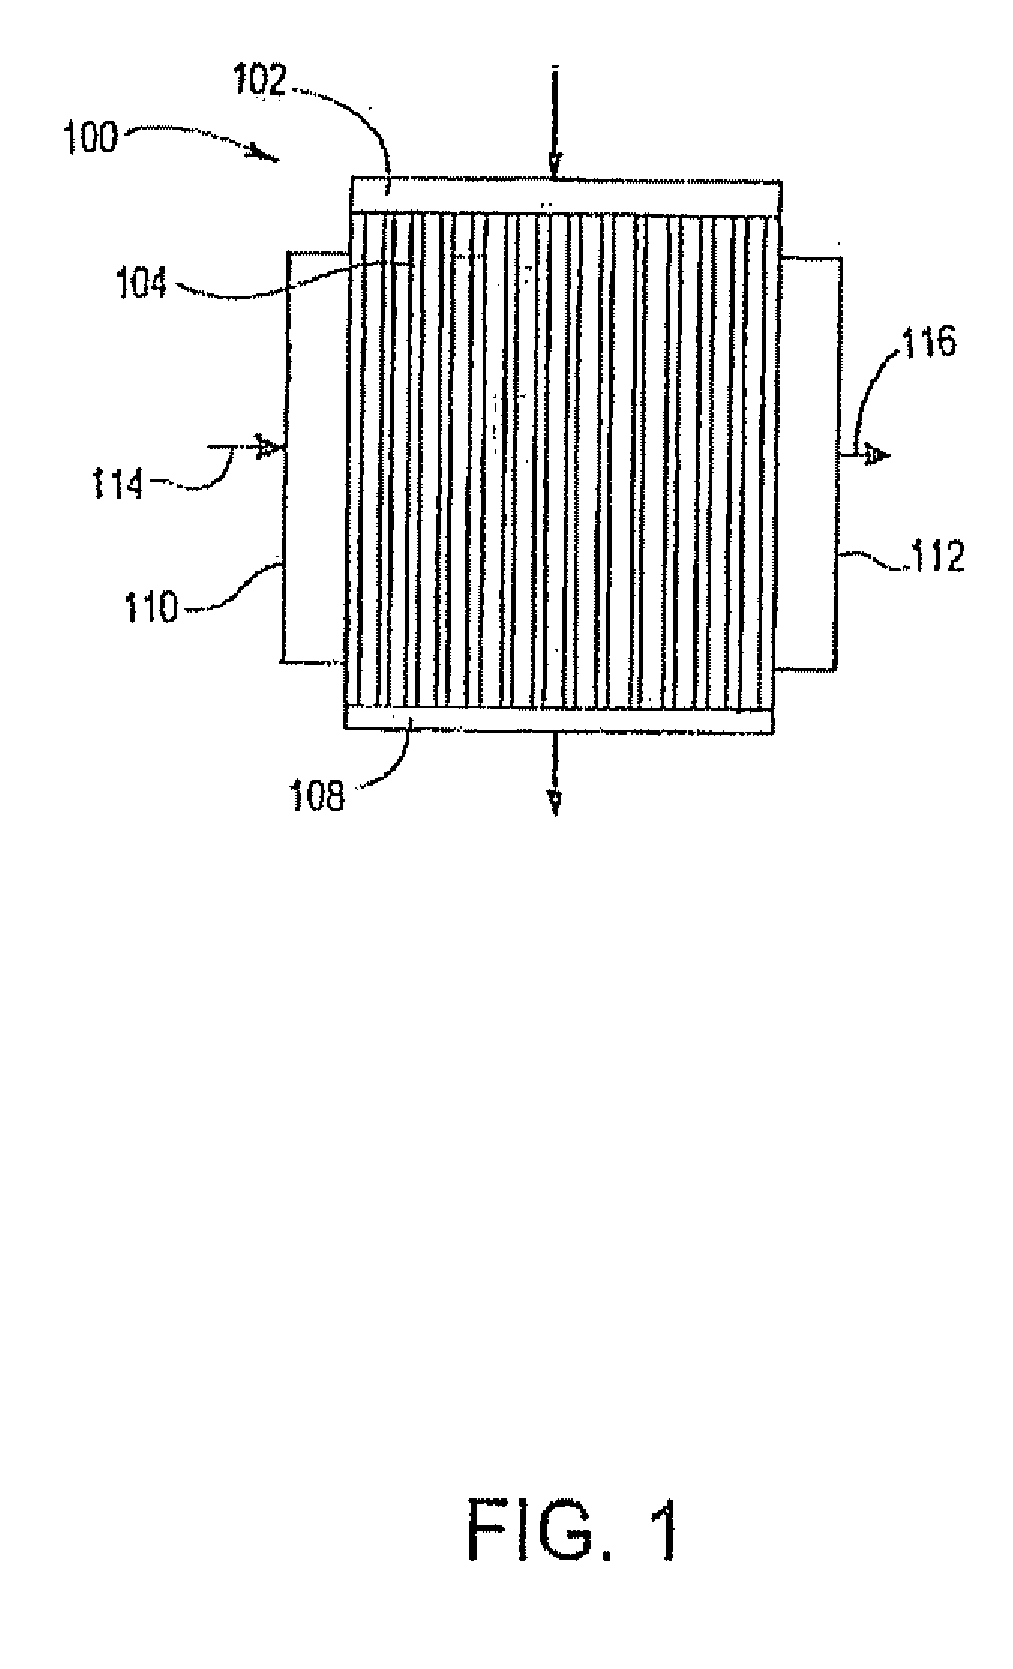 Method of installing an epoxidation catalyst in a reactor, a method of preparing an epoxidation catalyst, an epoxidation catalyst, a process for the preparation of an olefin oxide or a chemical derivable from an olefin oxide, and a reactor suitables for such a process